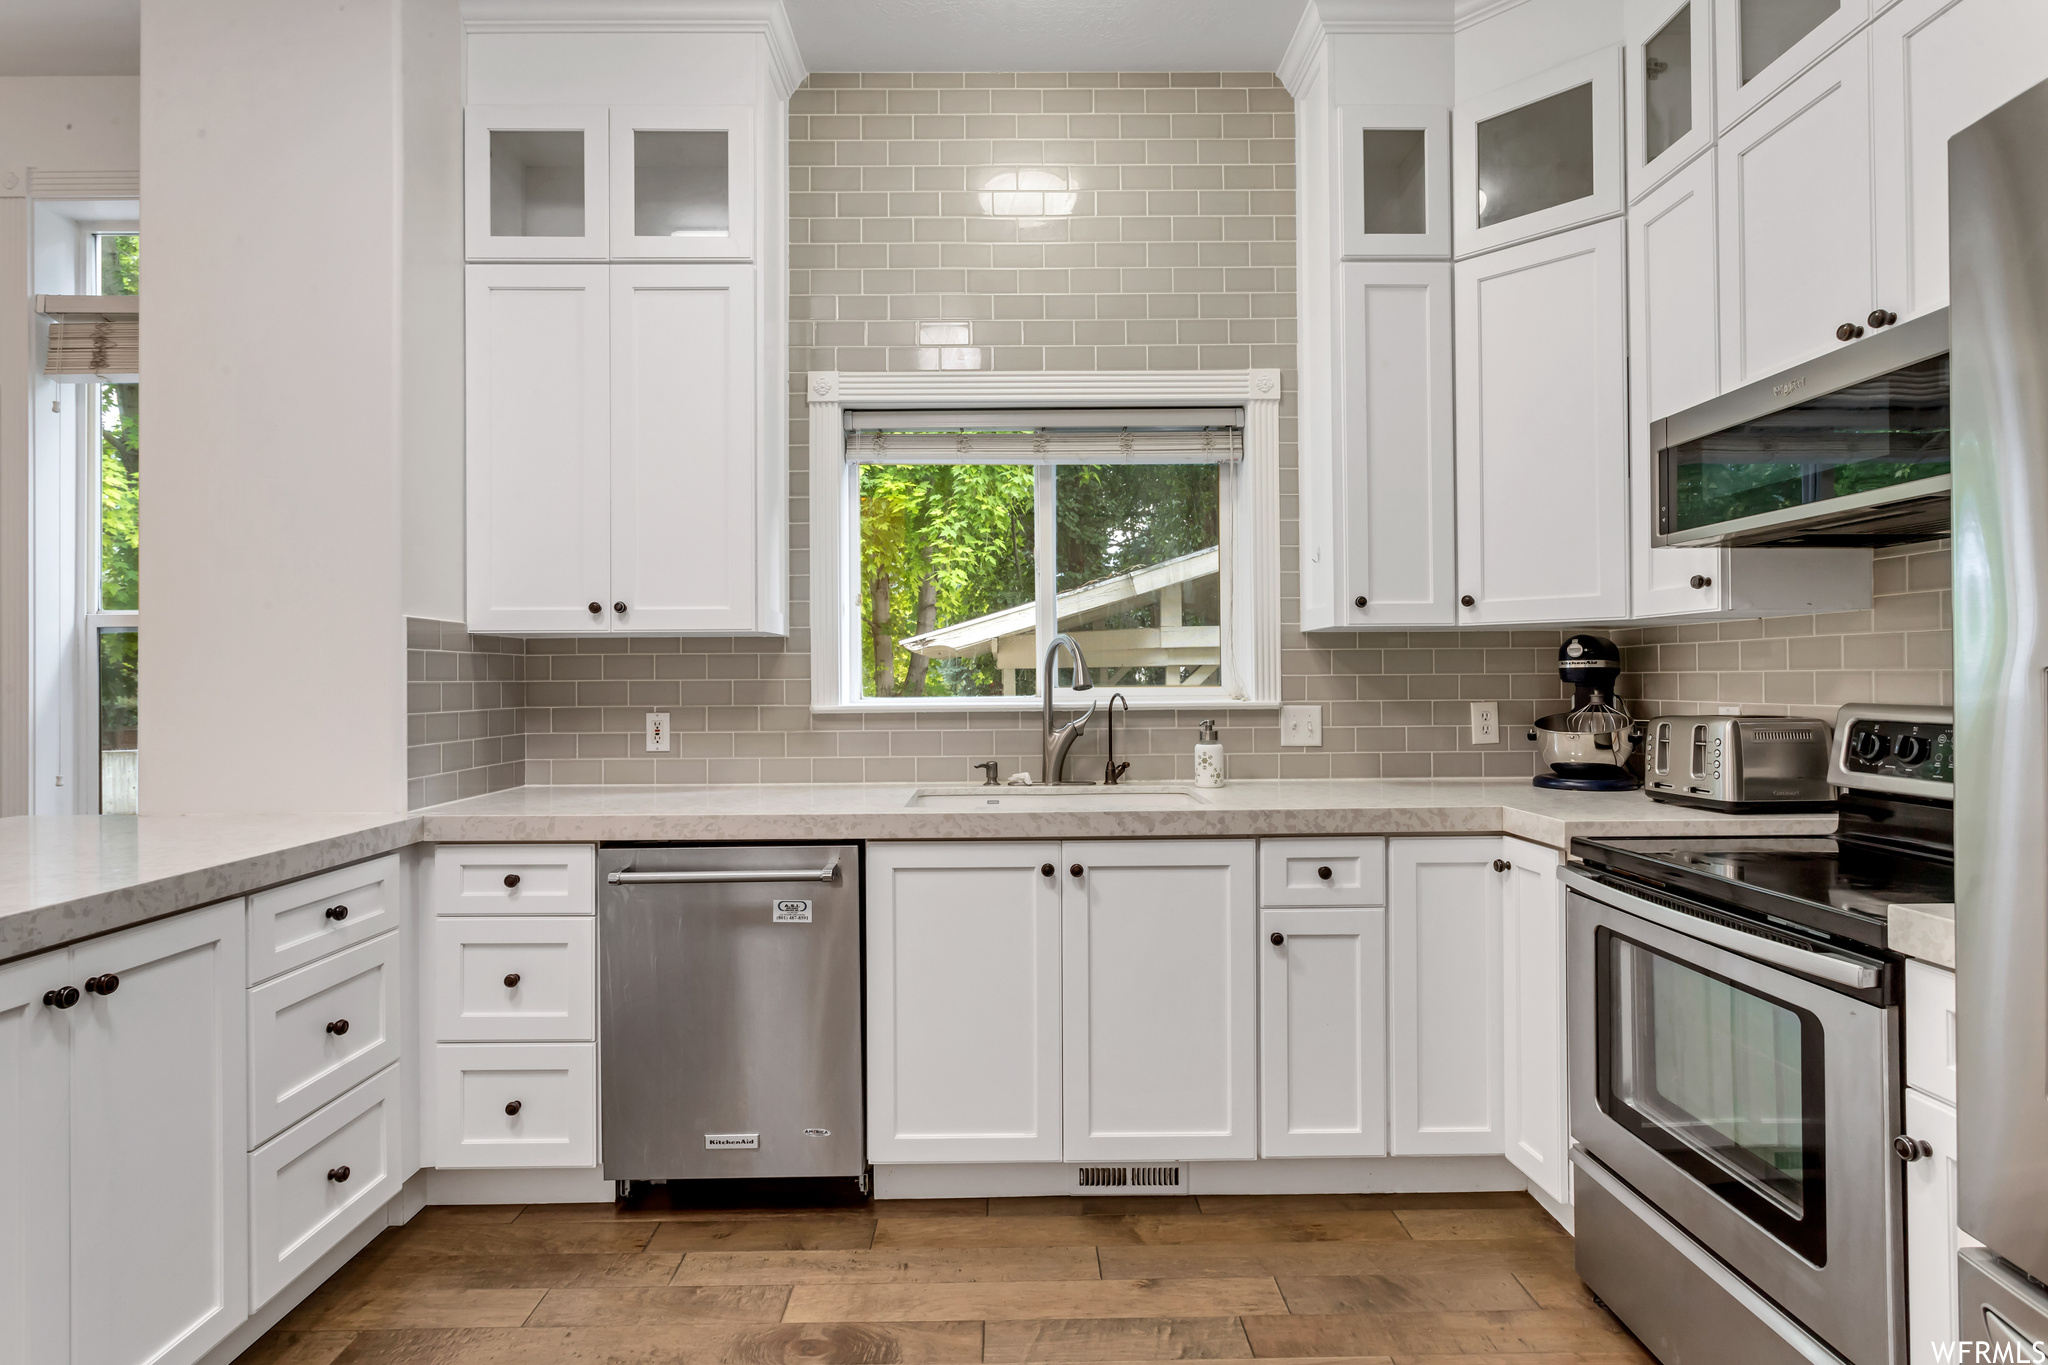 Kitchen with hardwood floors, stainless steel appliances, backsplash, white cabinets, and light countertops